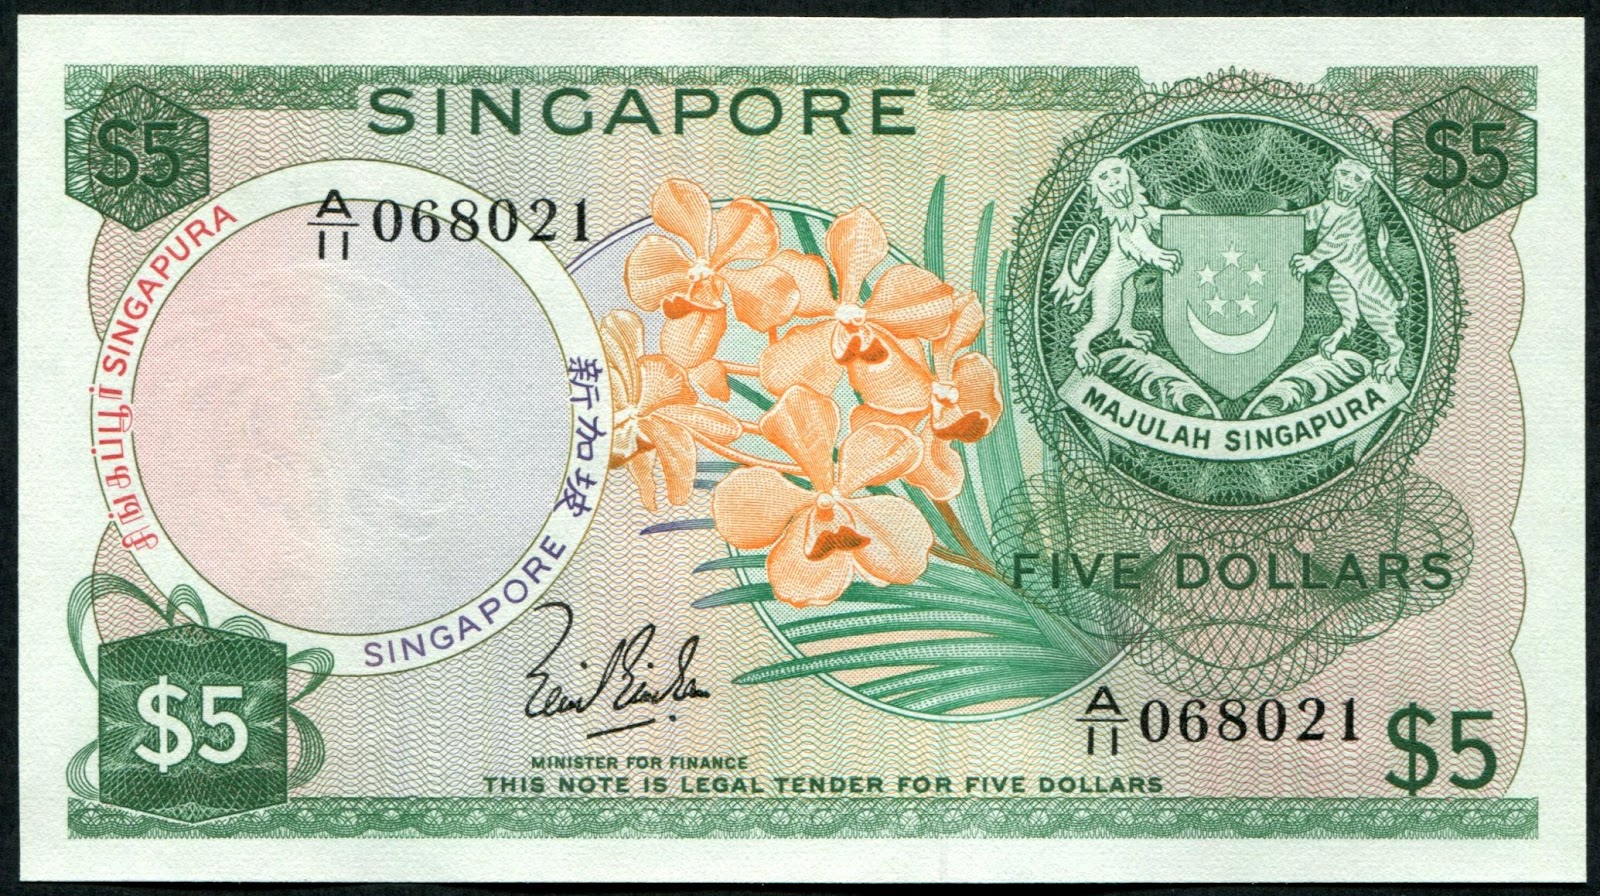 Songapore currency